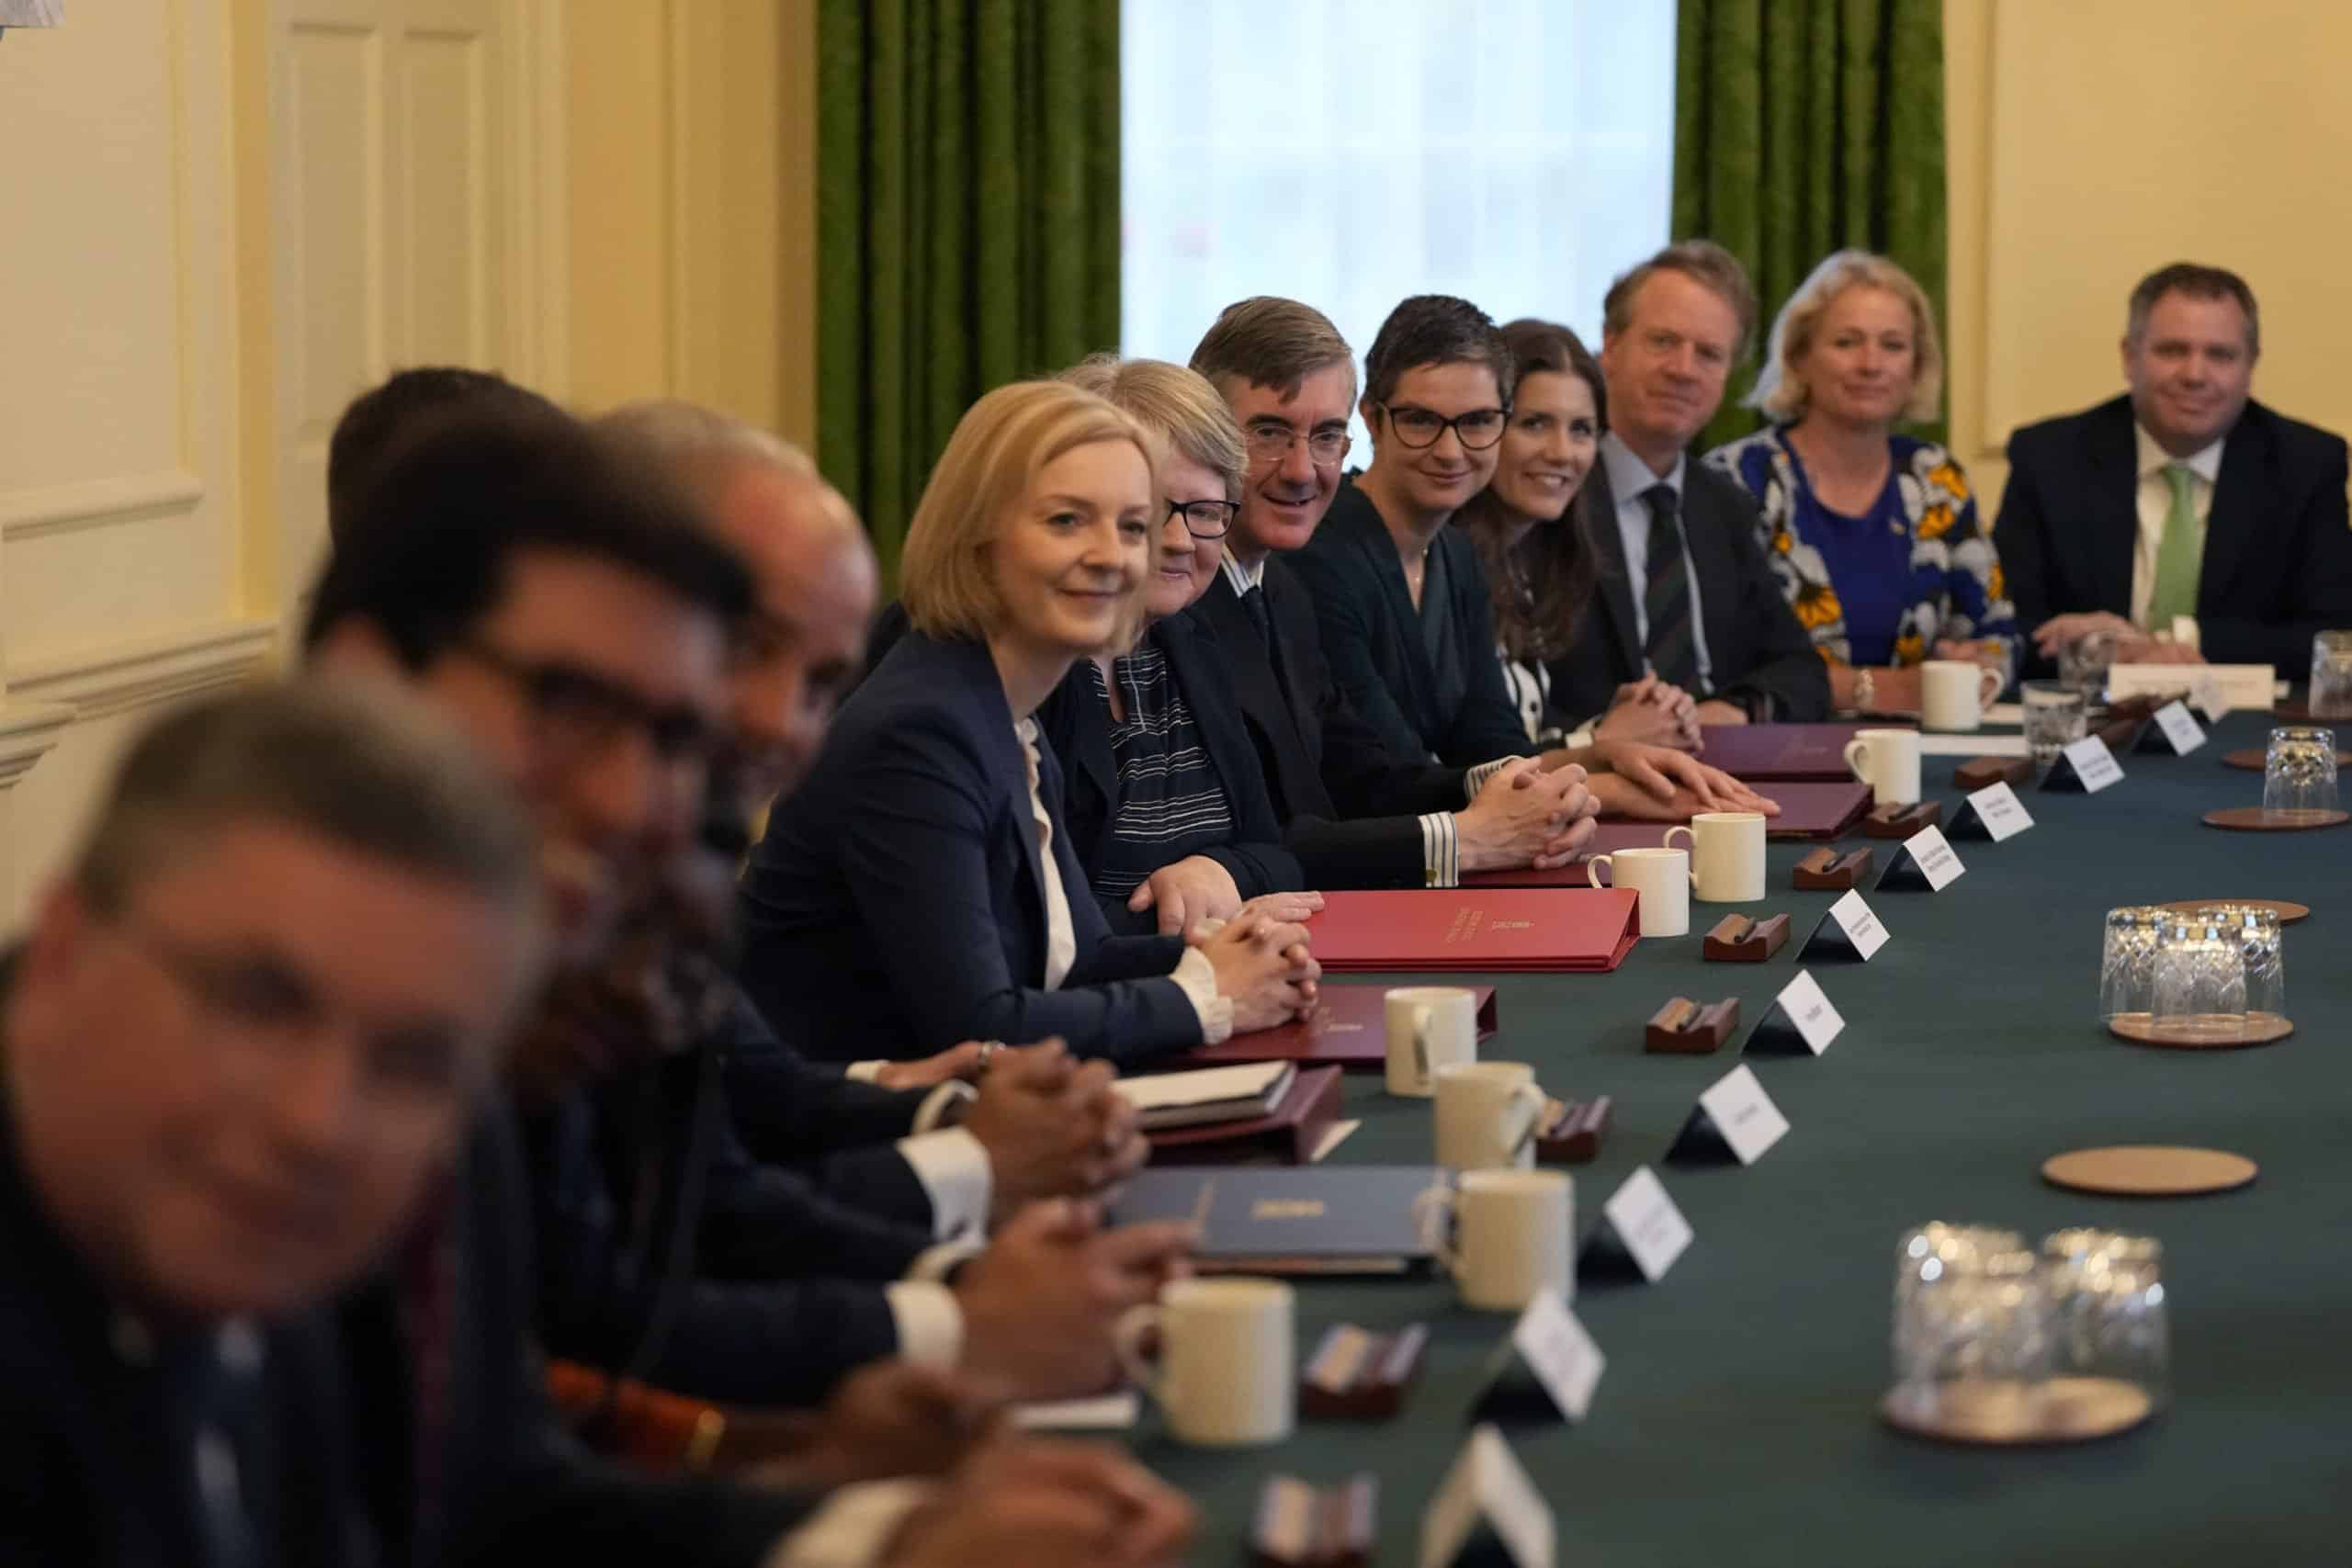 Cabinet reshuffle pictures corrupted by Twitter in the best possible way